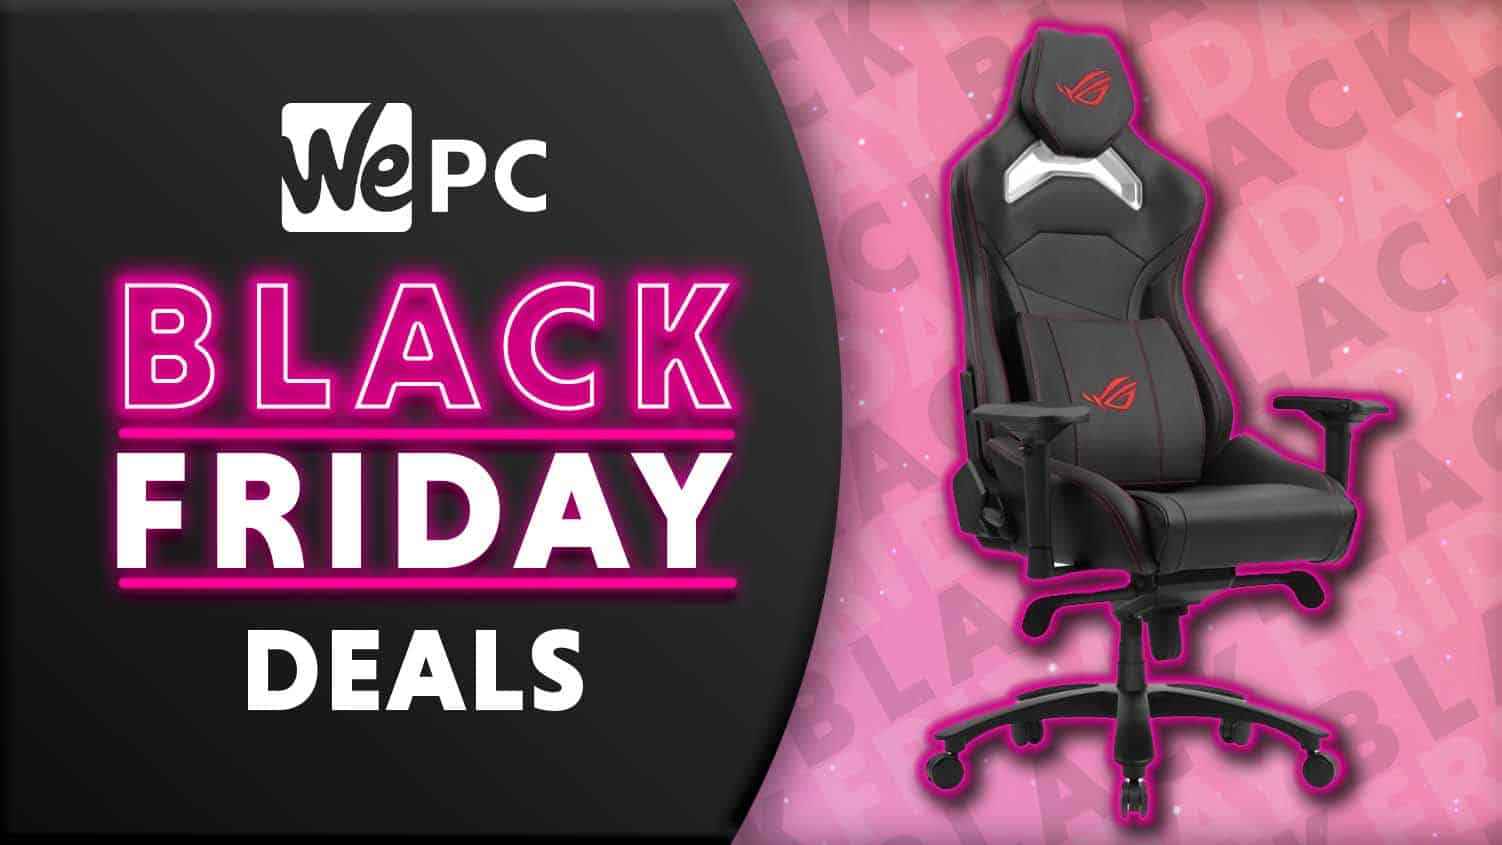 Save £150 on ASUS ROG Chariot Gaming Chair early Black Friday 2021 deals